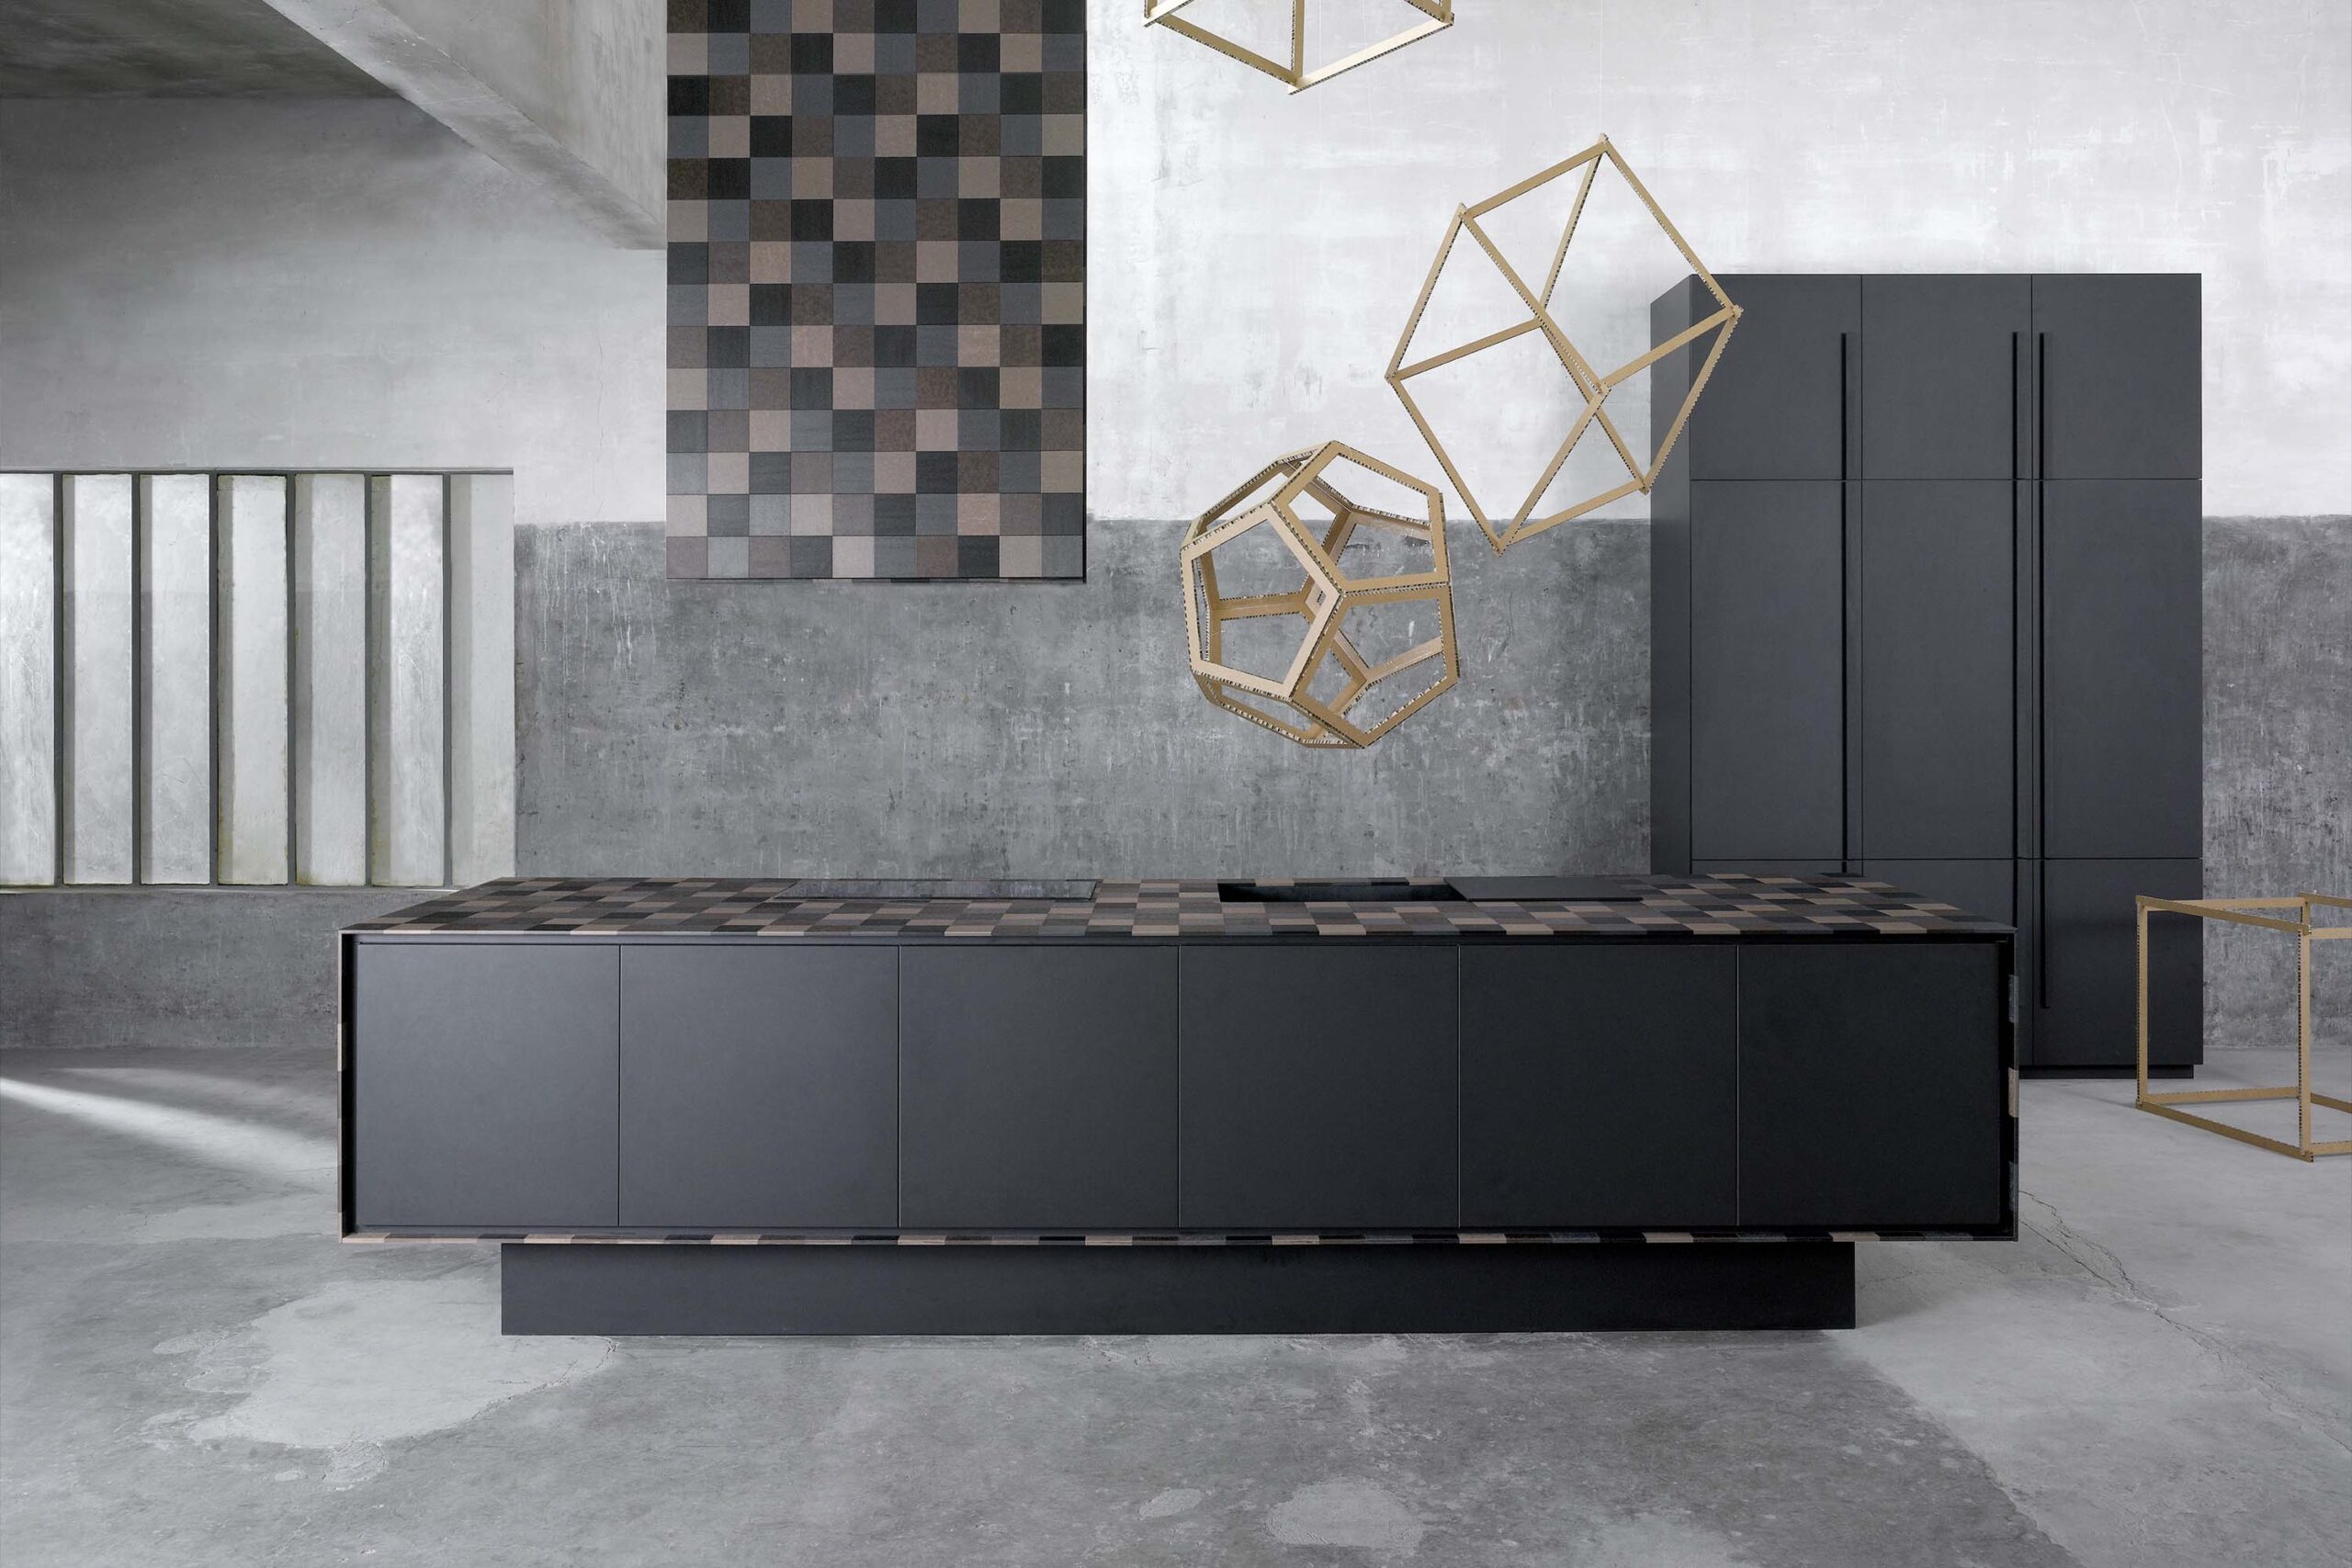 Luxury kitchen island made with Paperstone® recycled material worktop, a modern yet sustainable kitchen design.